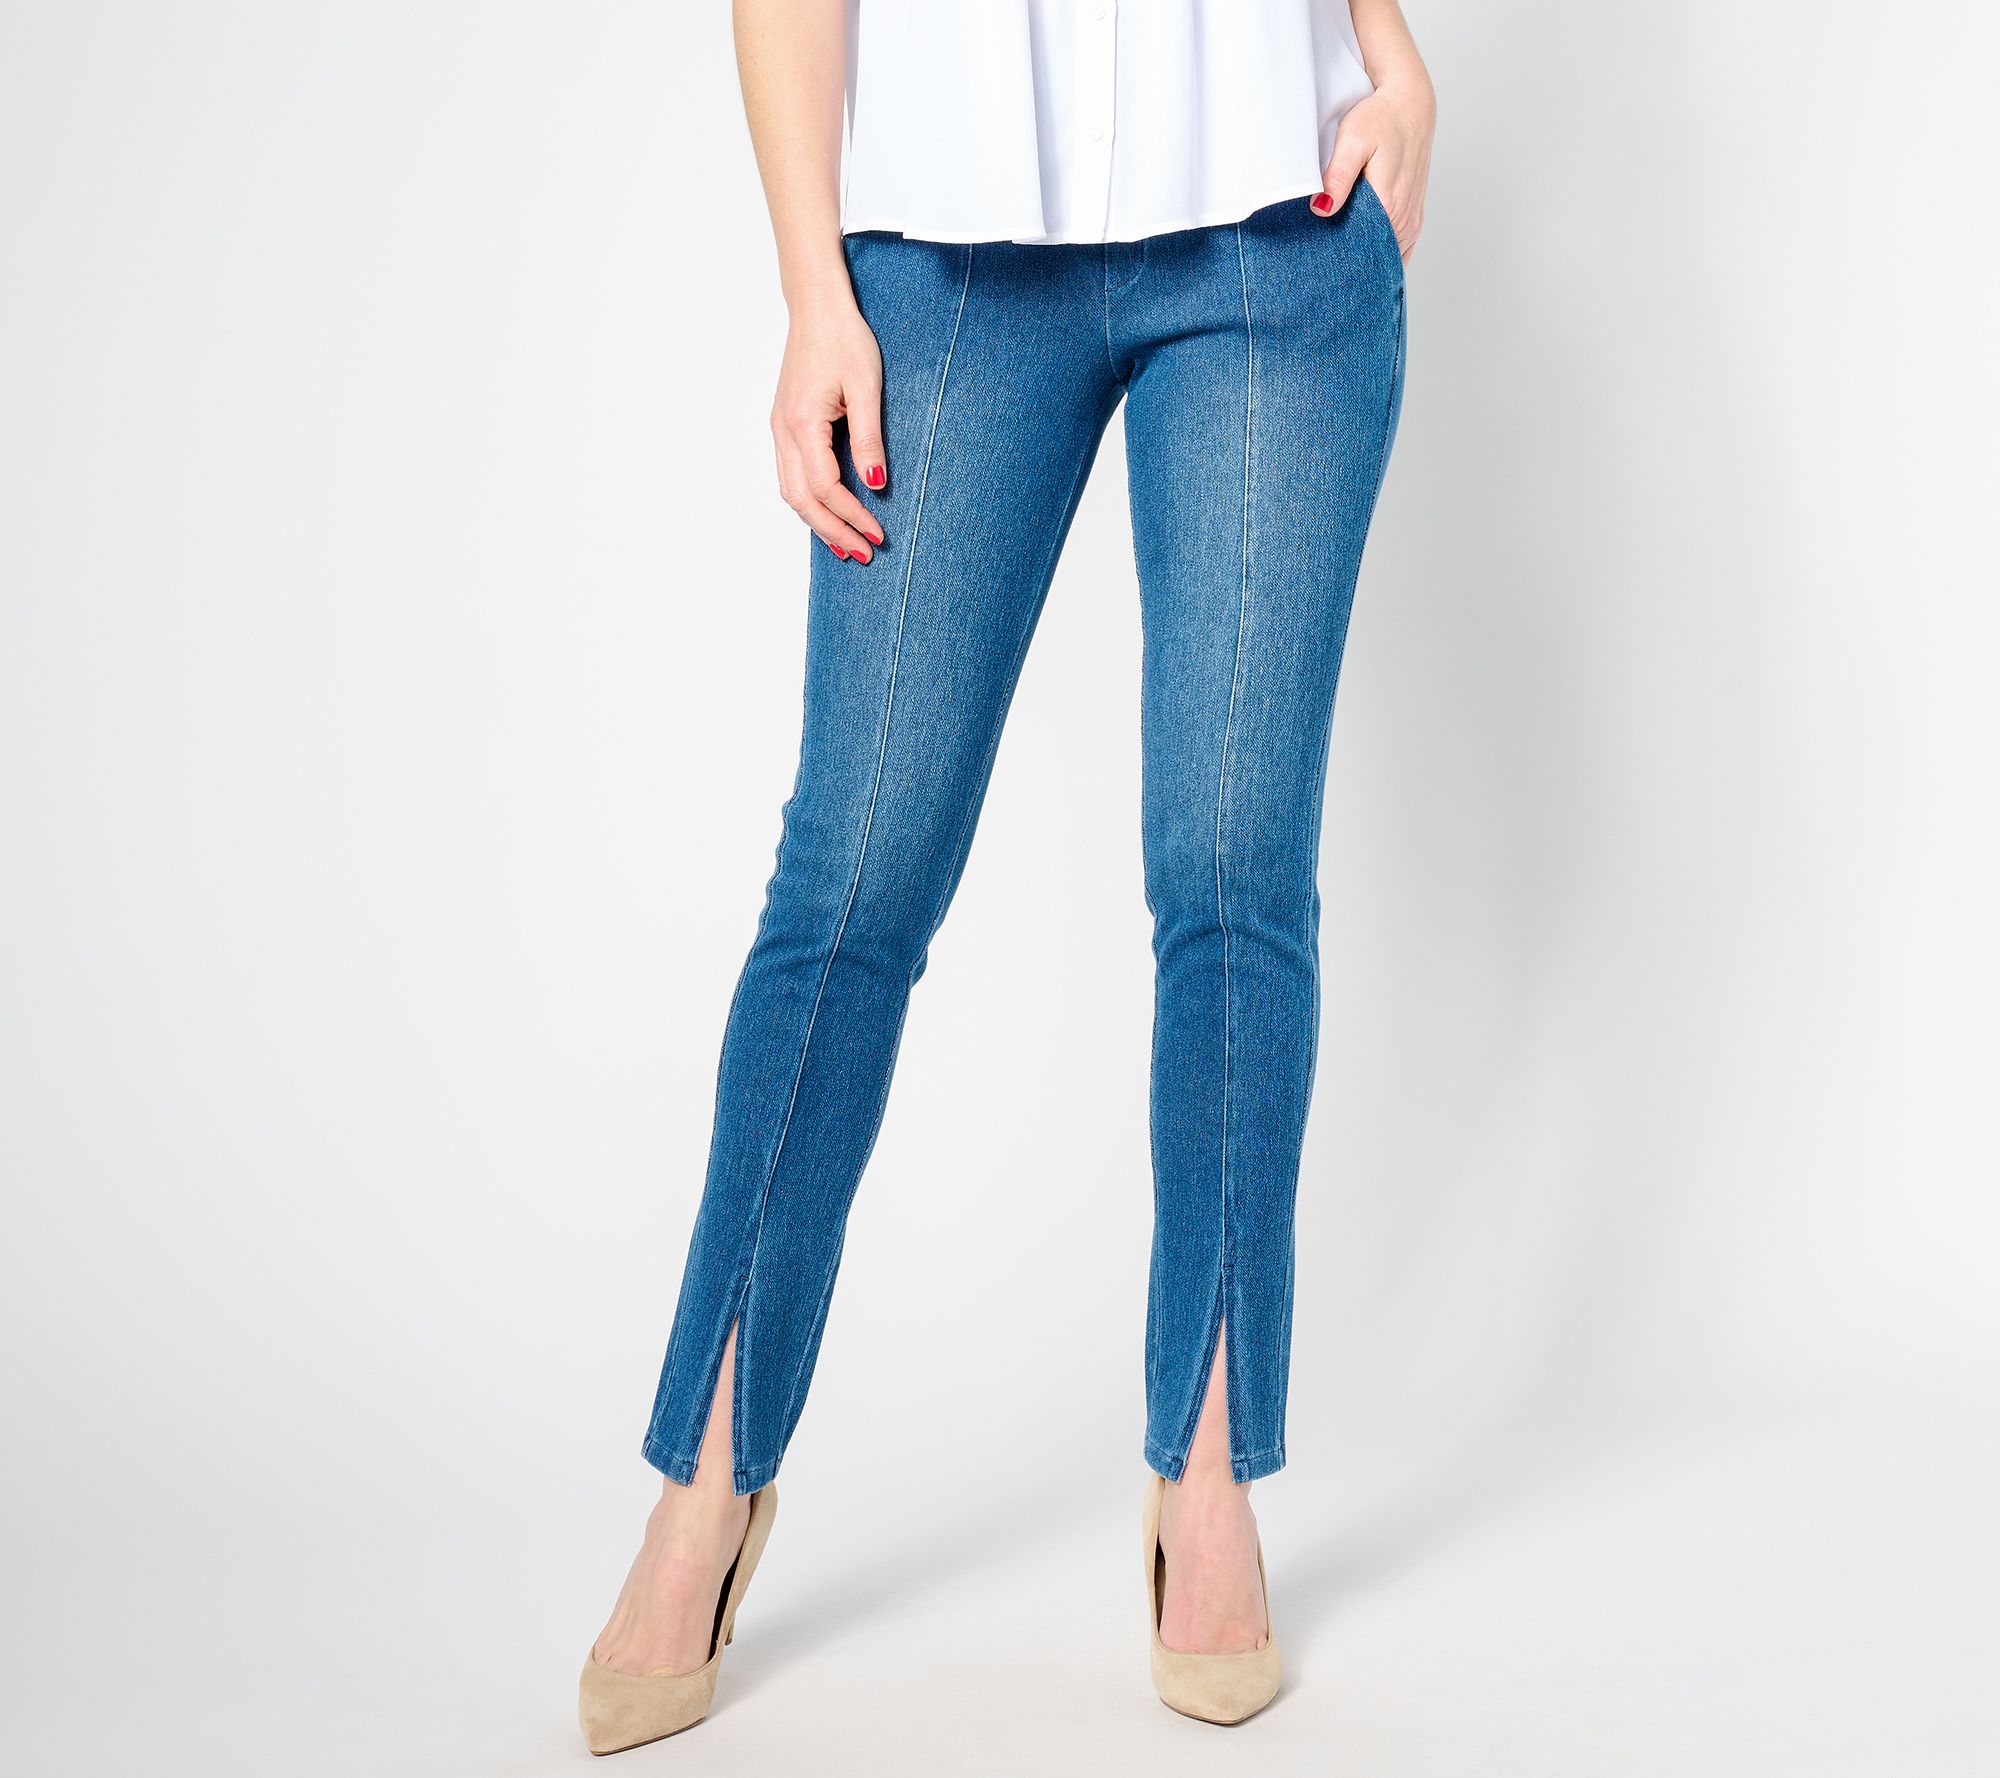 Women with Control Tall Prime Stretch Denim Leggings with Pockets